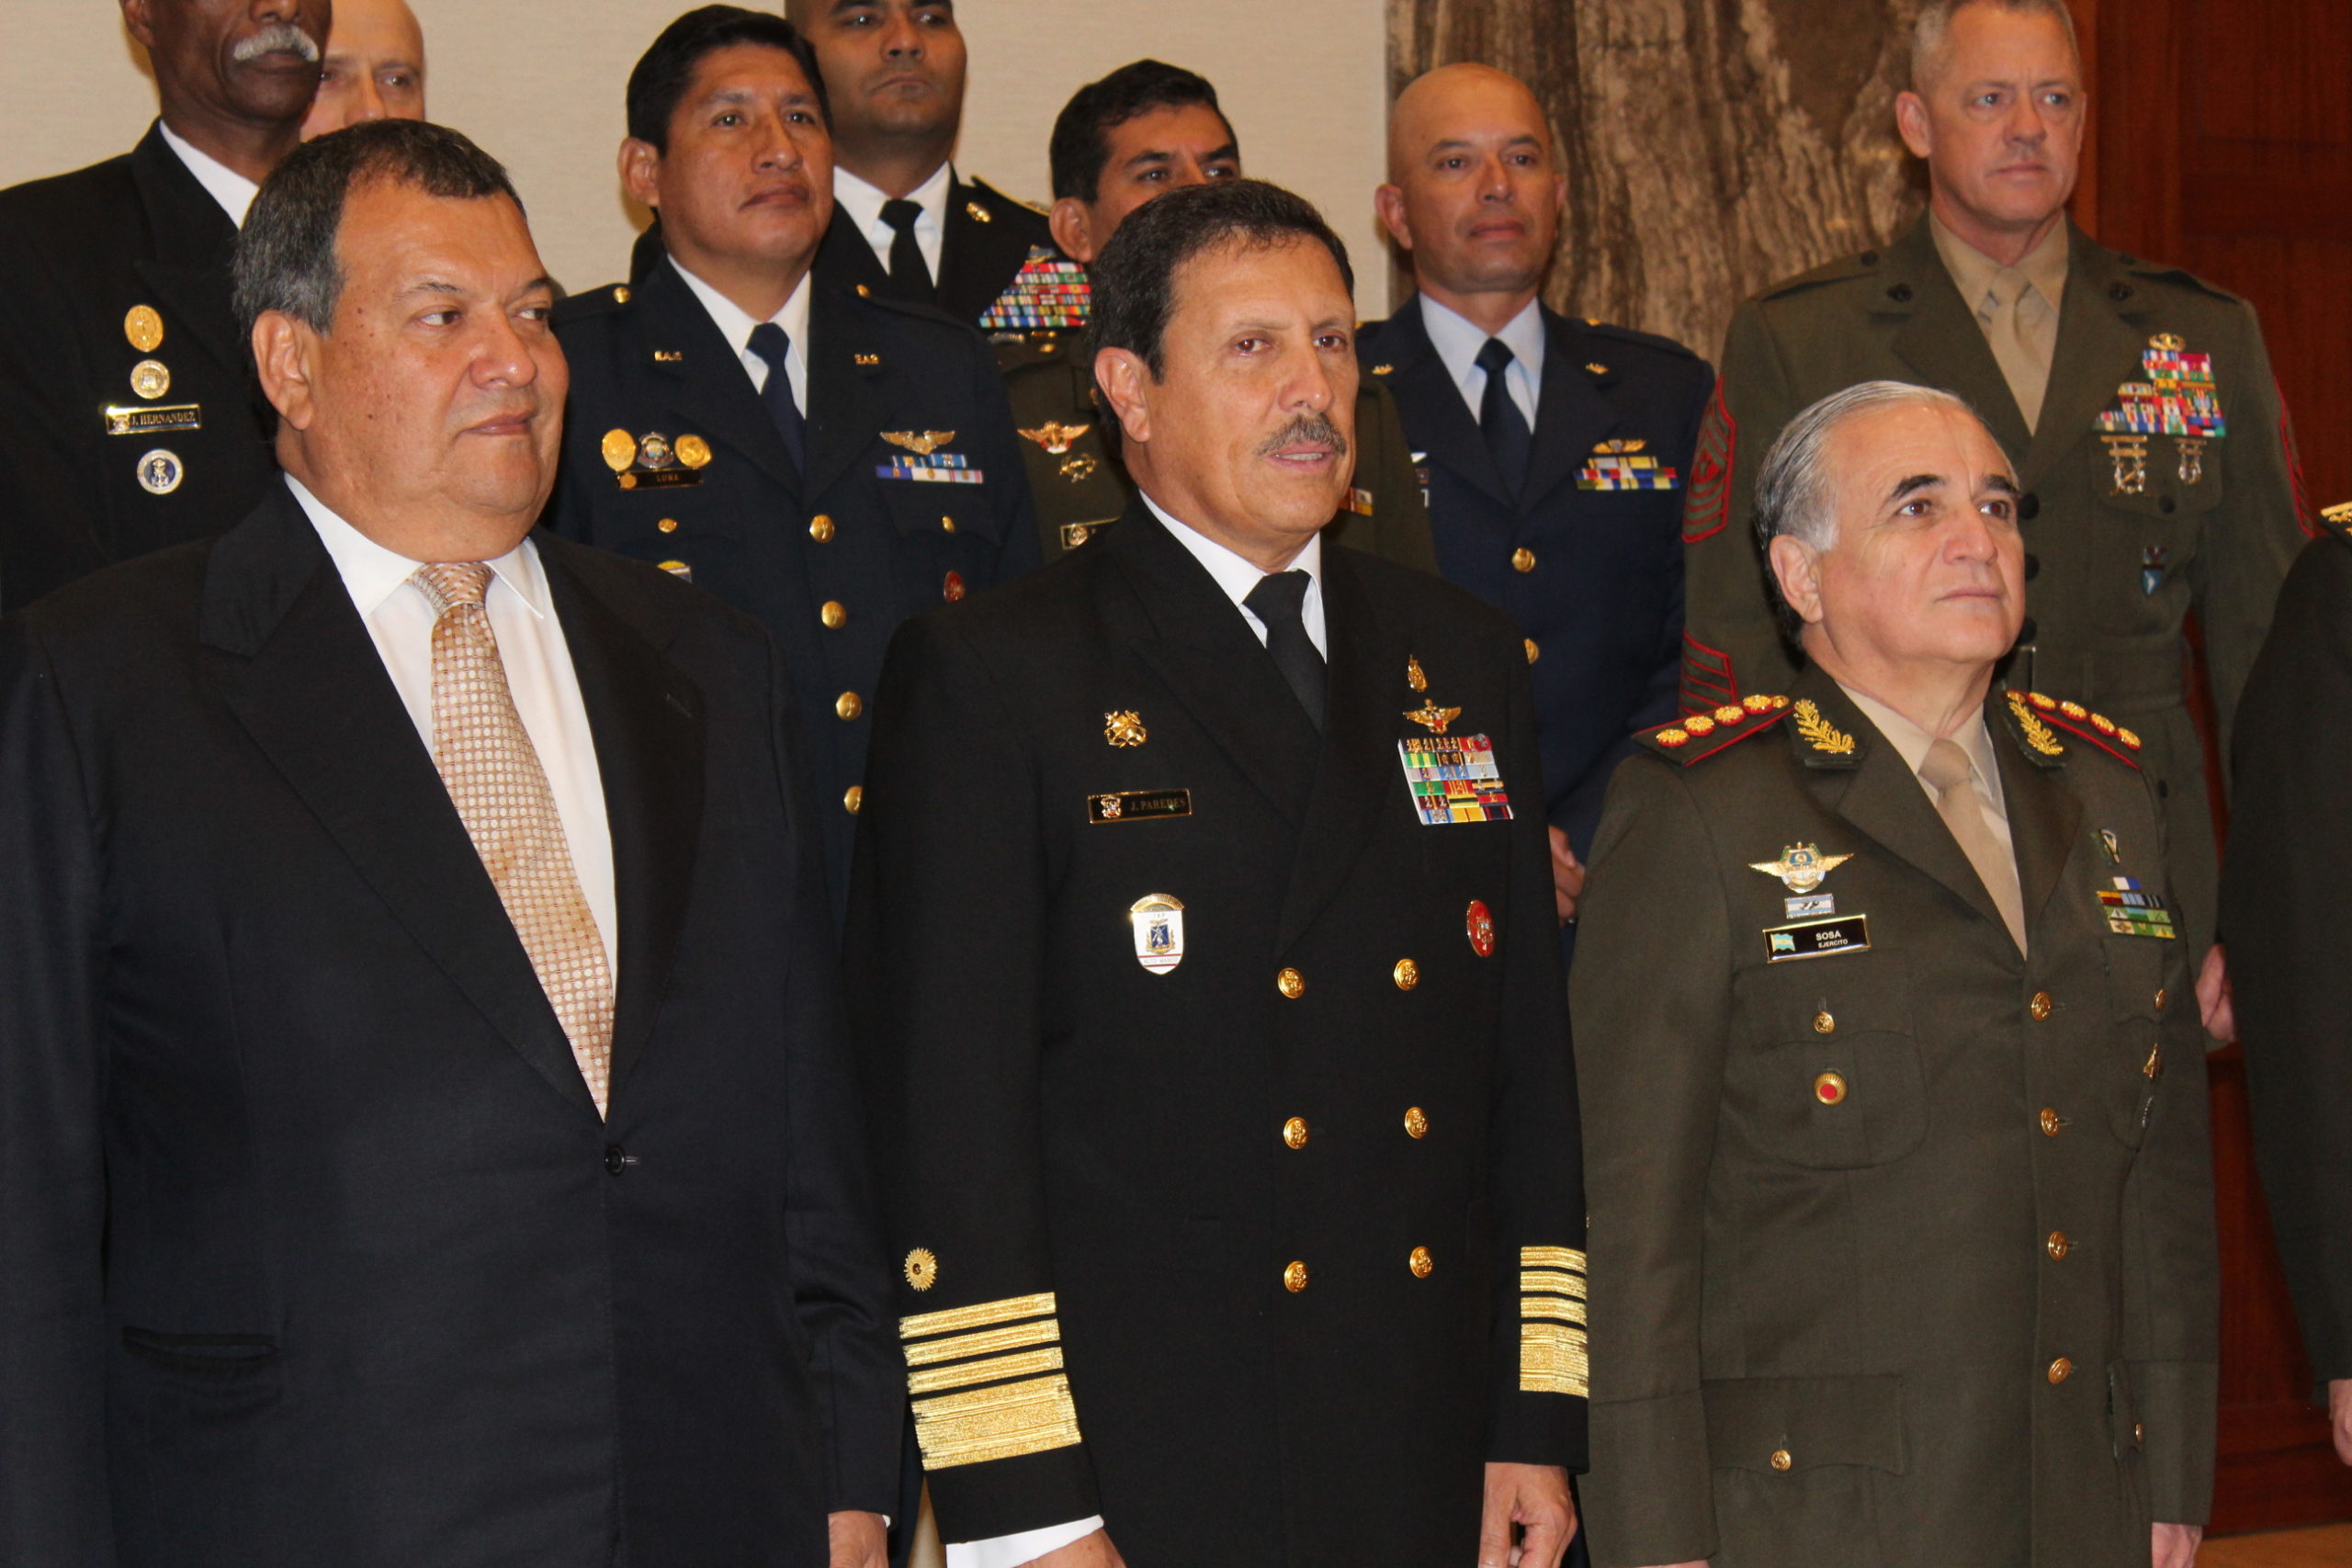 The Peruvian Armed Forces Counter Illicit Activity